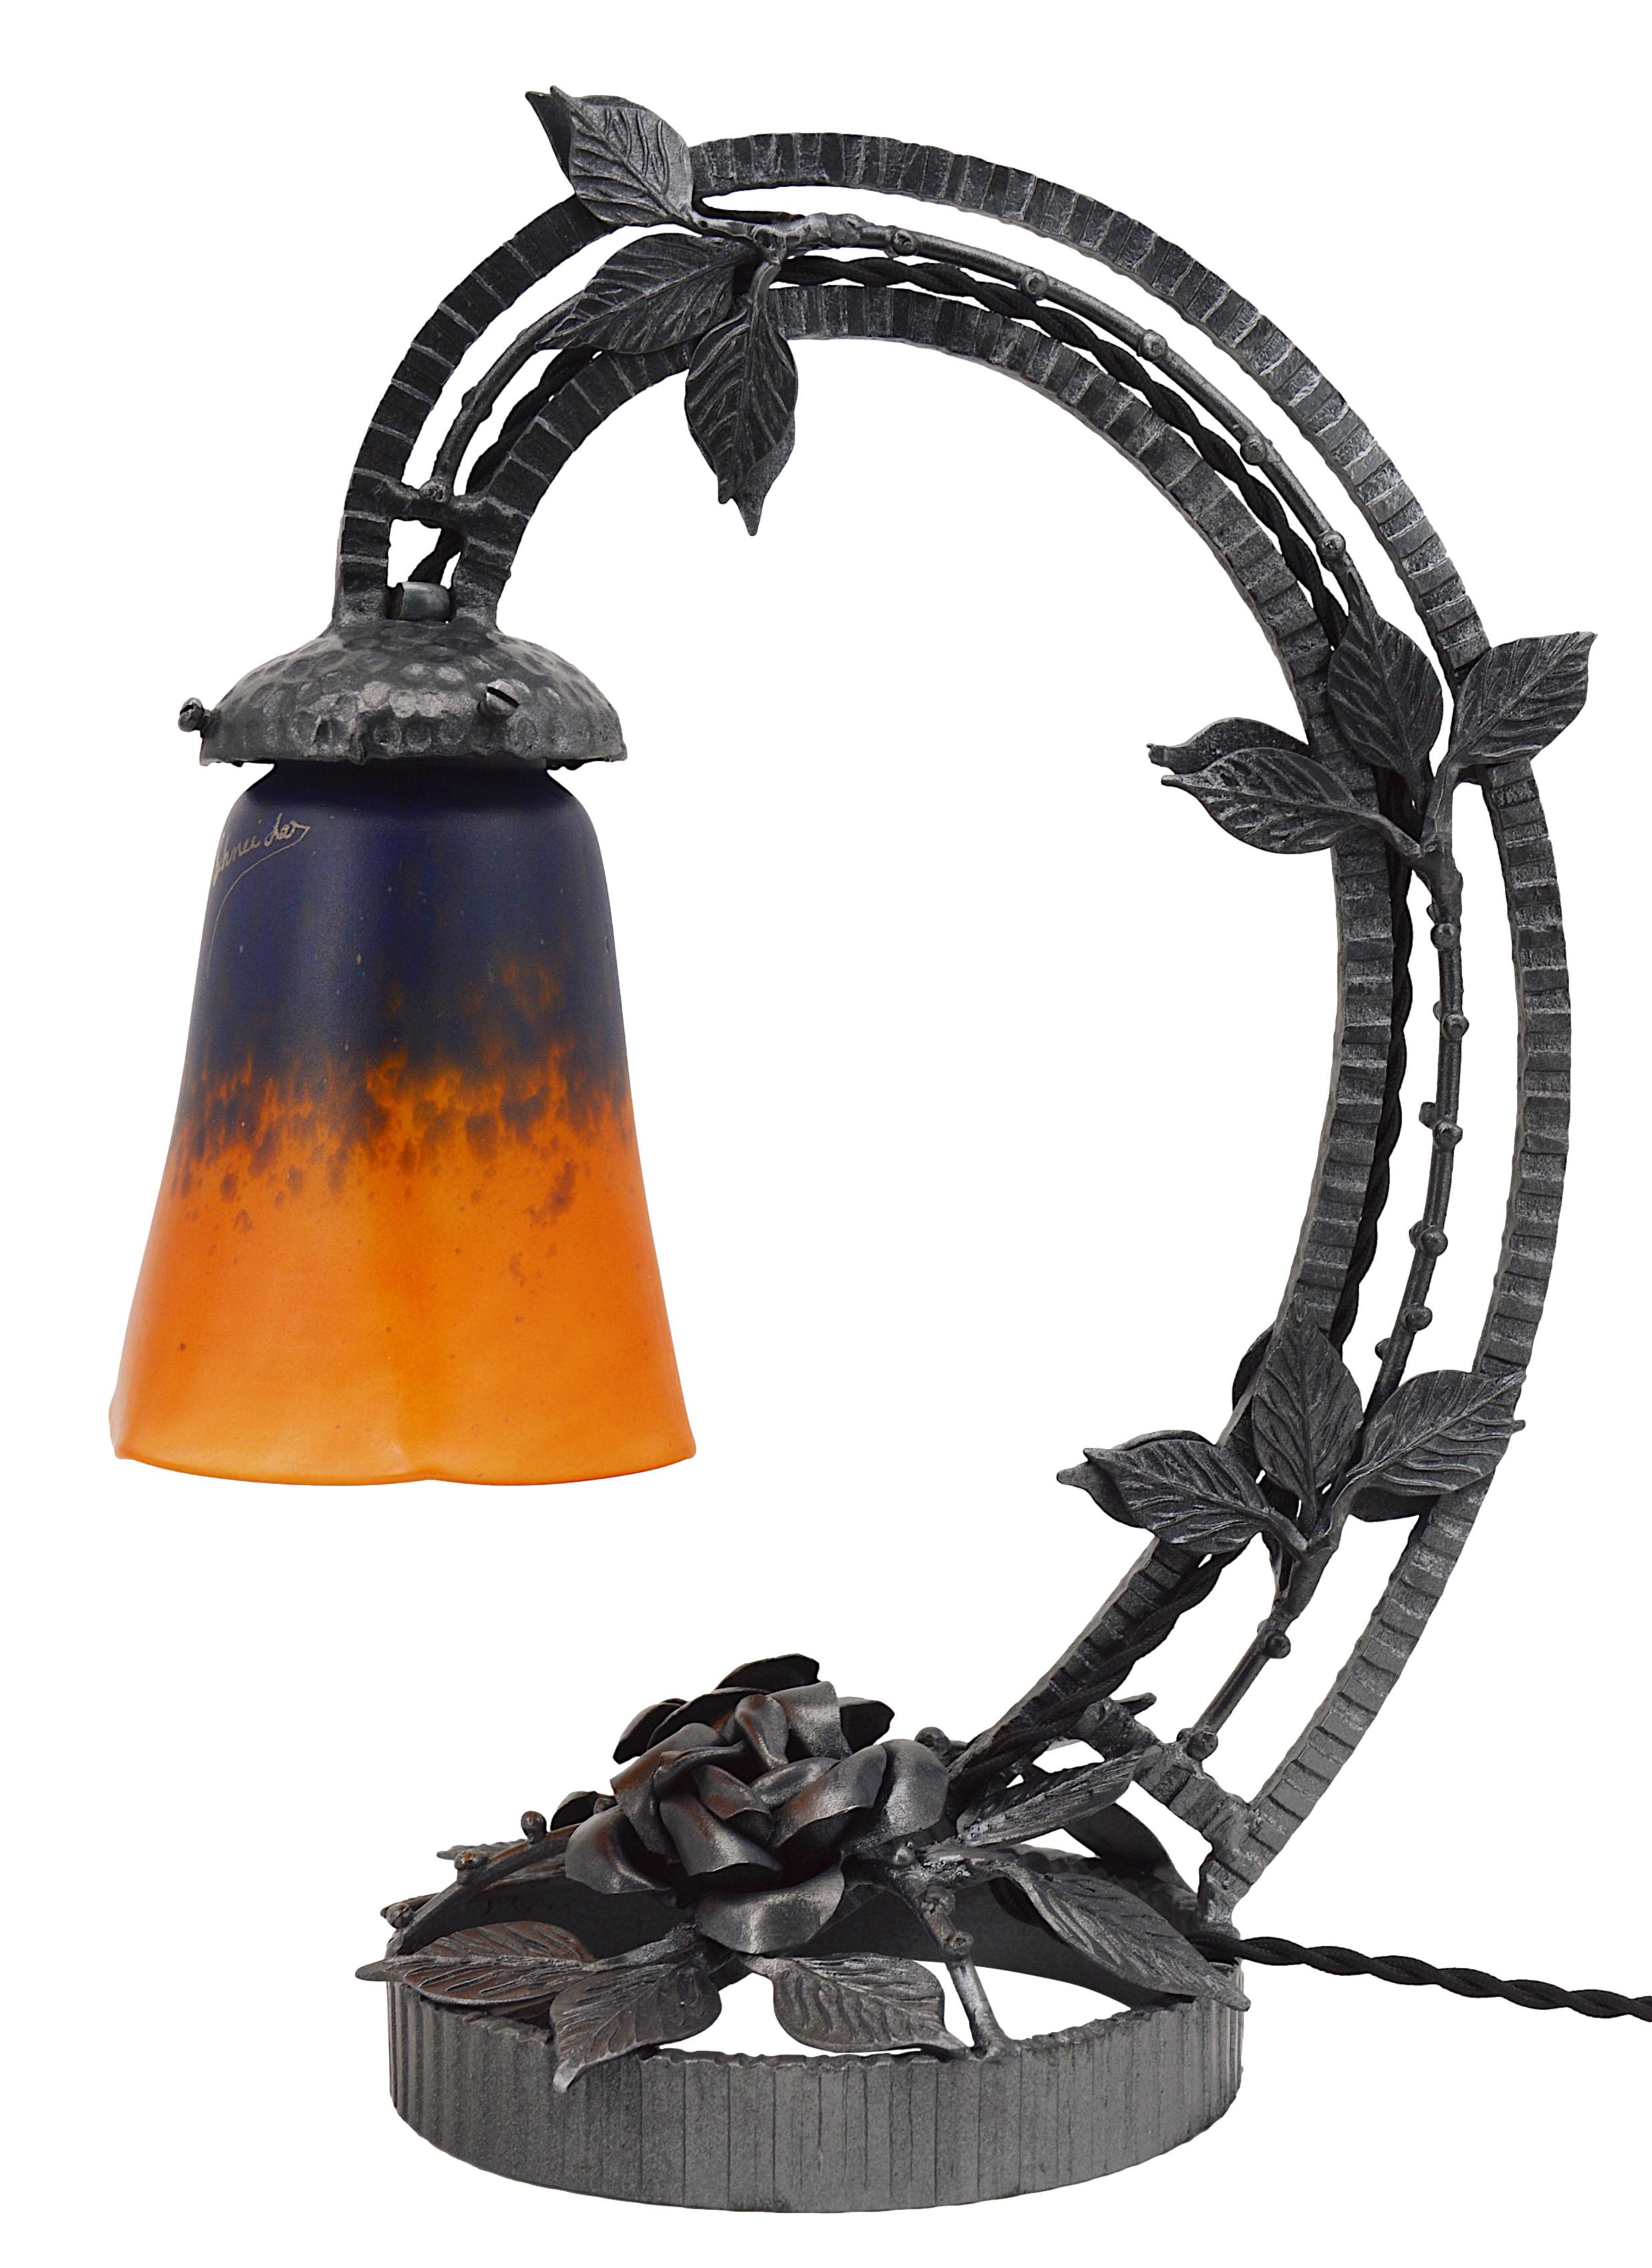 French Art Deco table lamp by Charles Schneider, Epinay-sur-Seine (Paris), 1920s. Mottled glass shade, powders are applied between two layers, that comes hung at its superb wrought-iron base. Height : 14